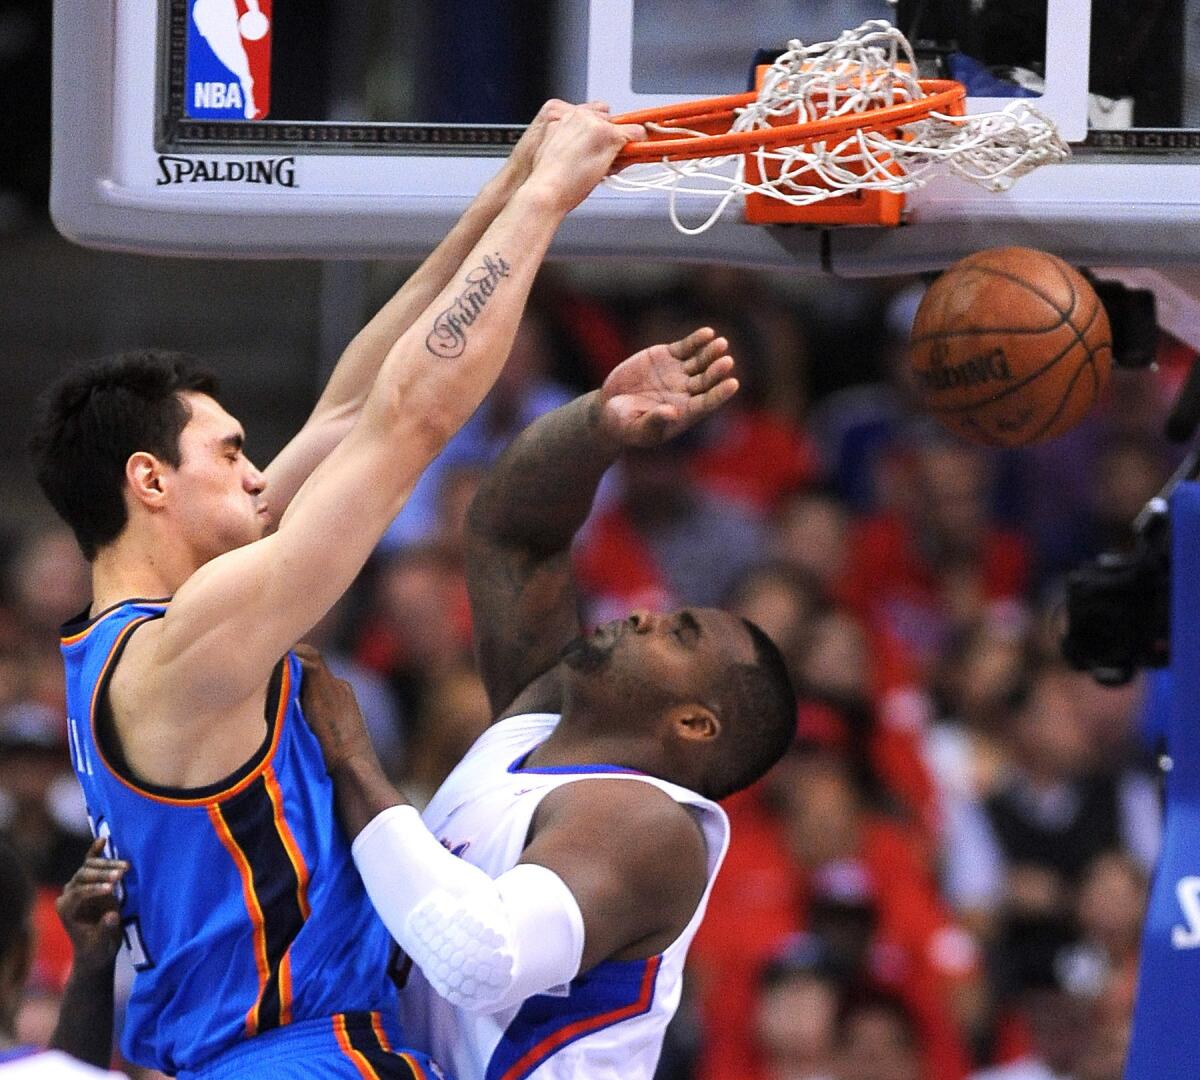 Steven Adams of the Thunder dunks over Clipper Glen Davis in Game 3 of the NBA Western Conference playoffs in May.